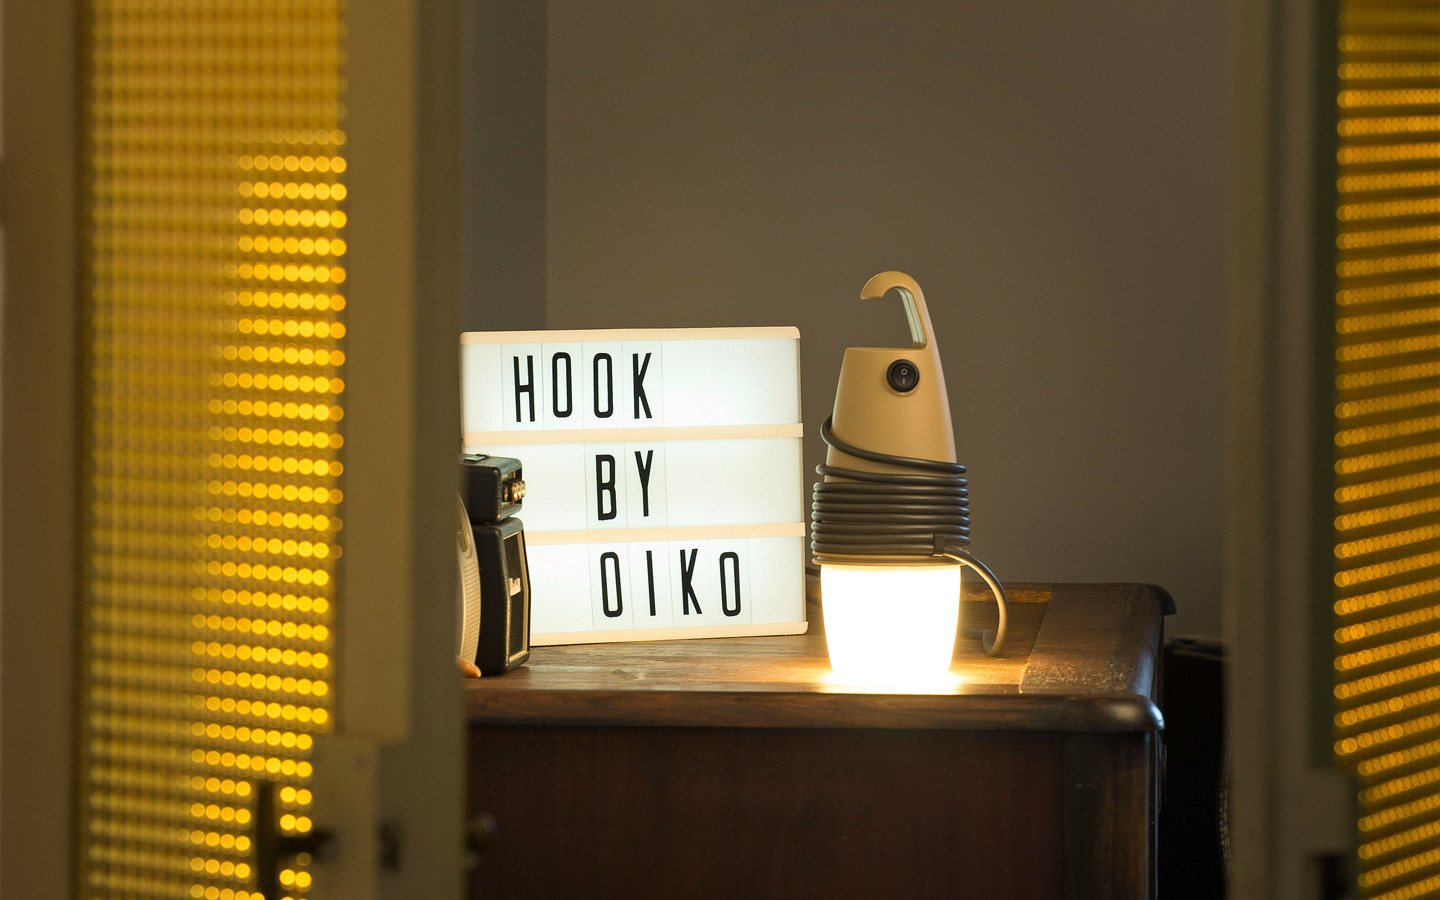 Hook, ecological and solidary lamp